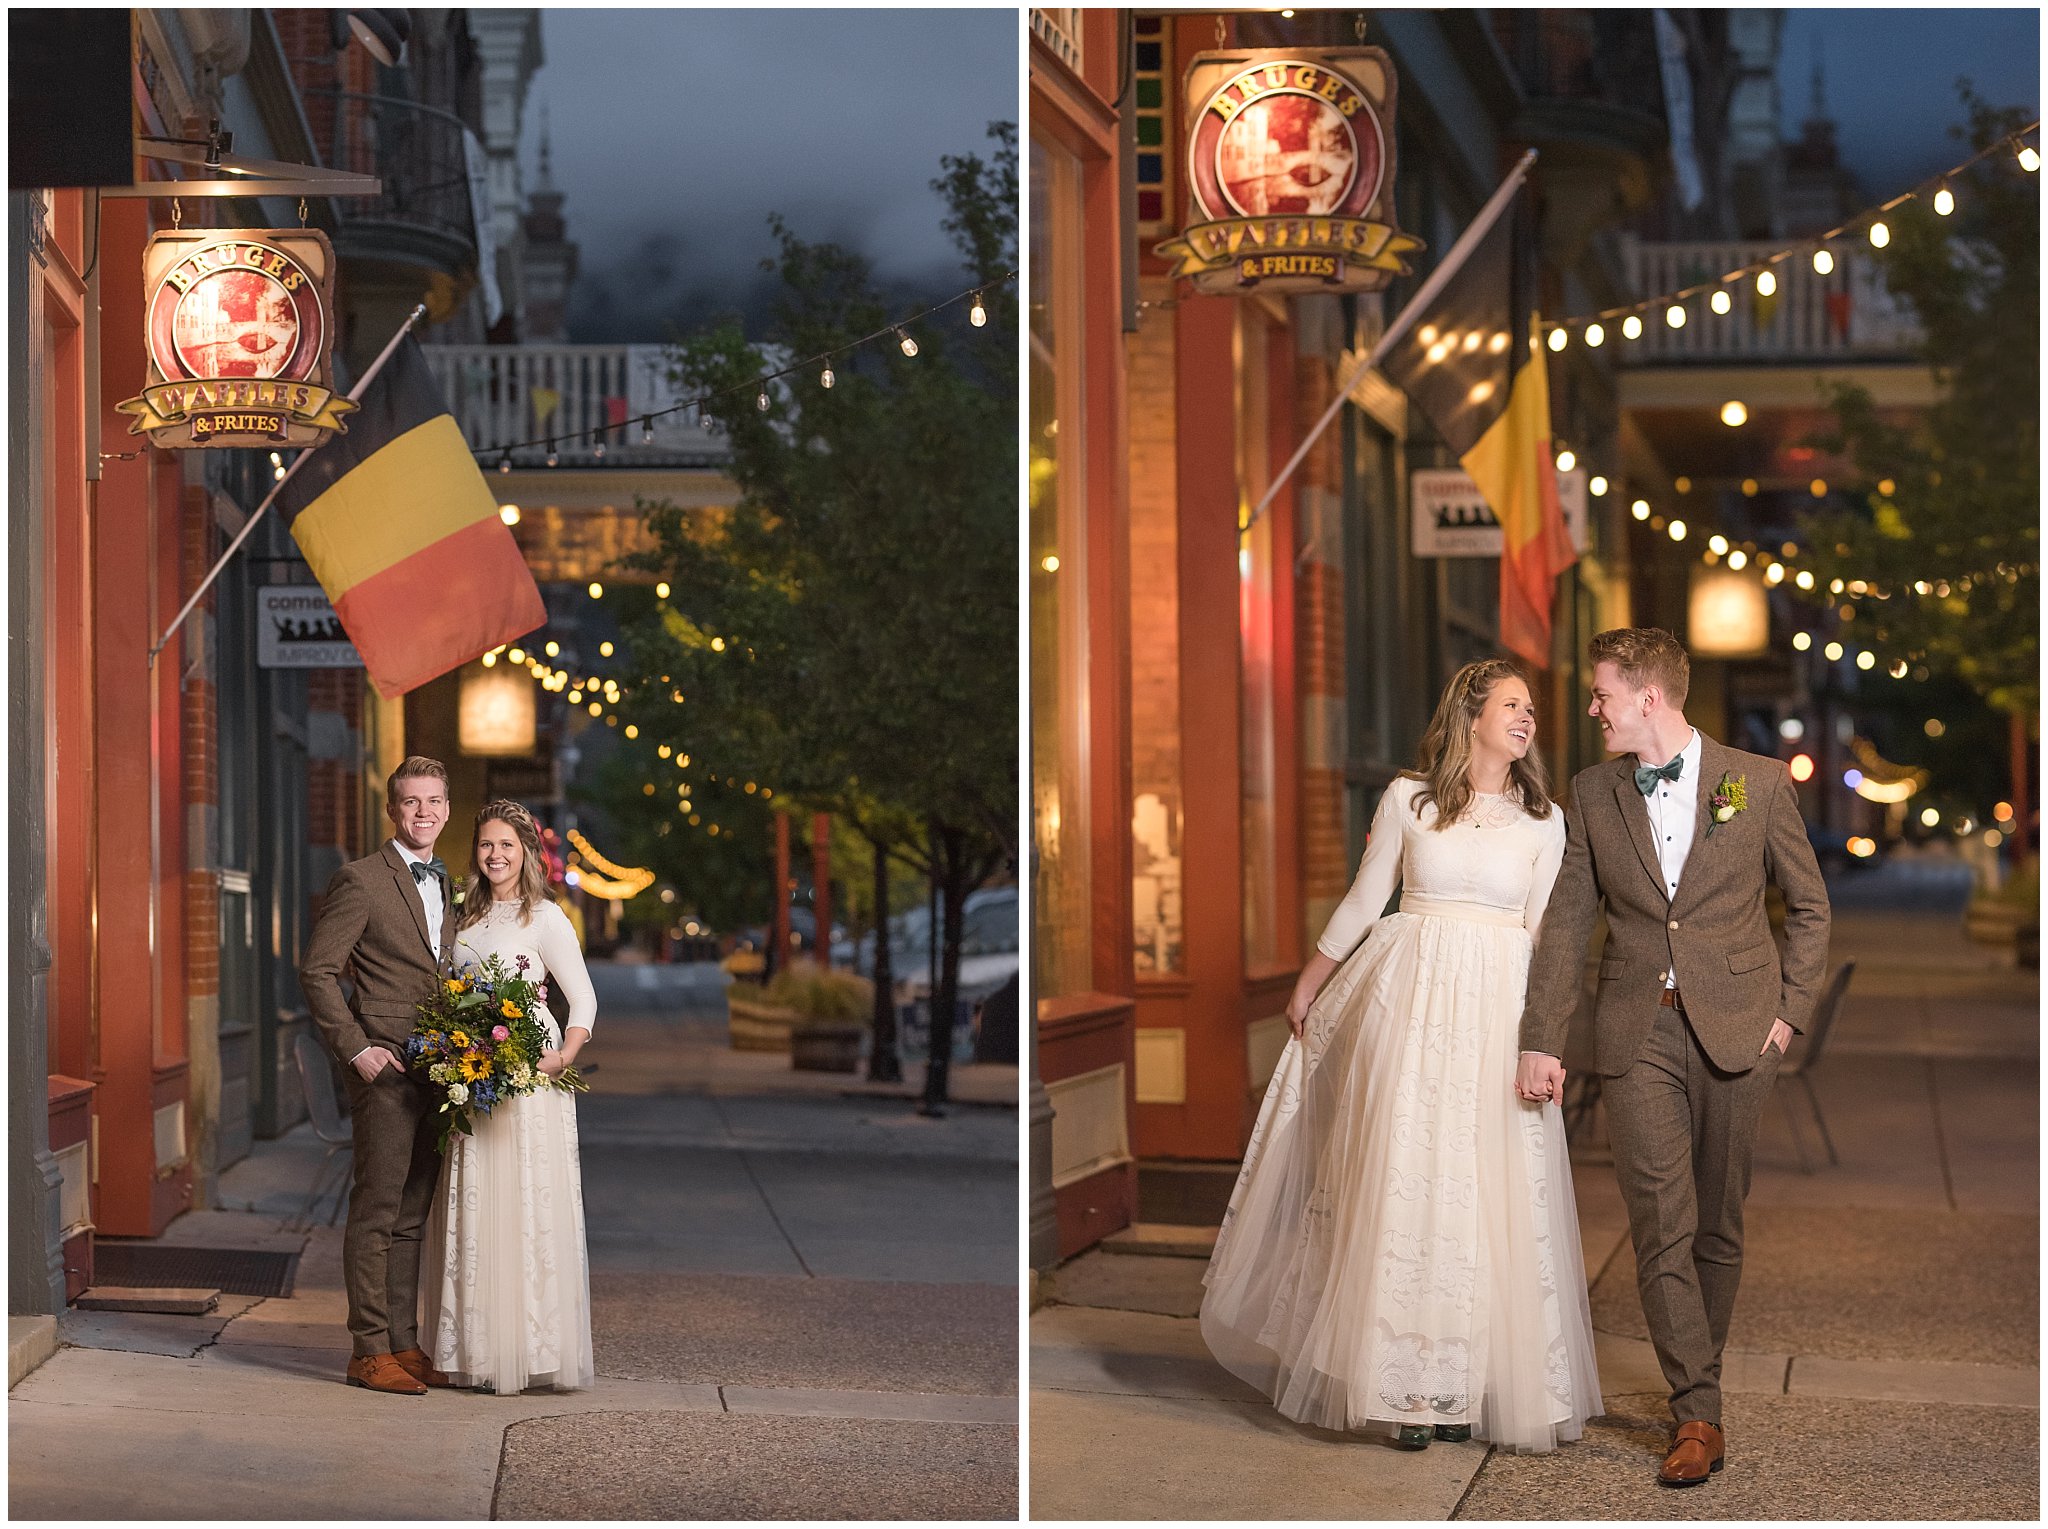 Bride wearing flowy dress and groom wearing tweed suit and green bow tie for vintage inspired wedding attire | Bruges Waffles at night | Provo City Center Temple Spring Formal Session | Jessie and Dallin Photography